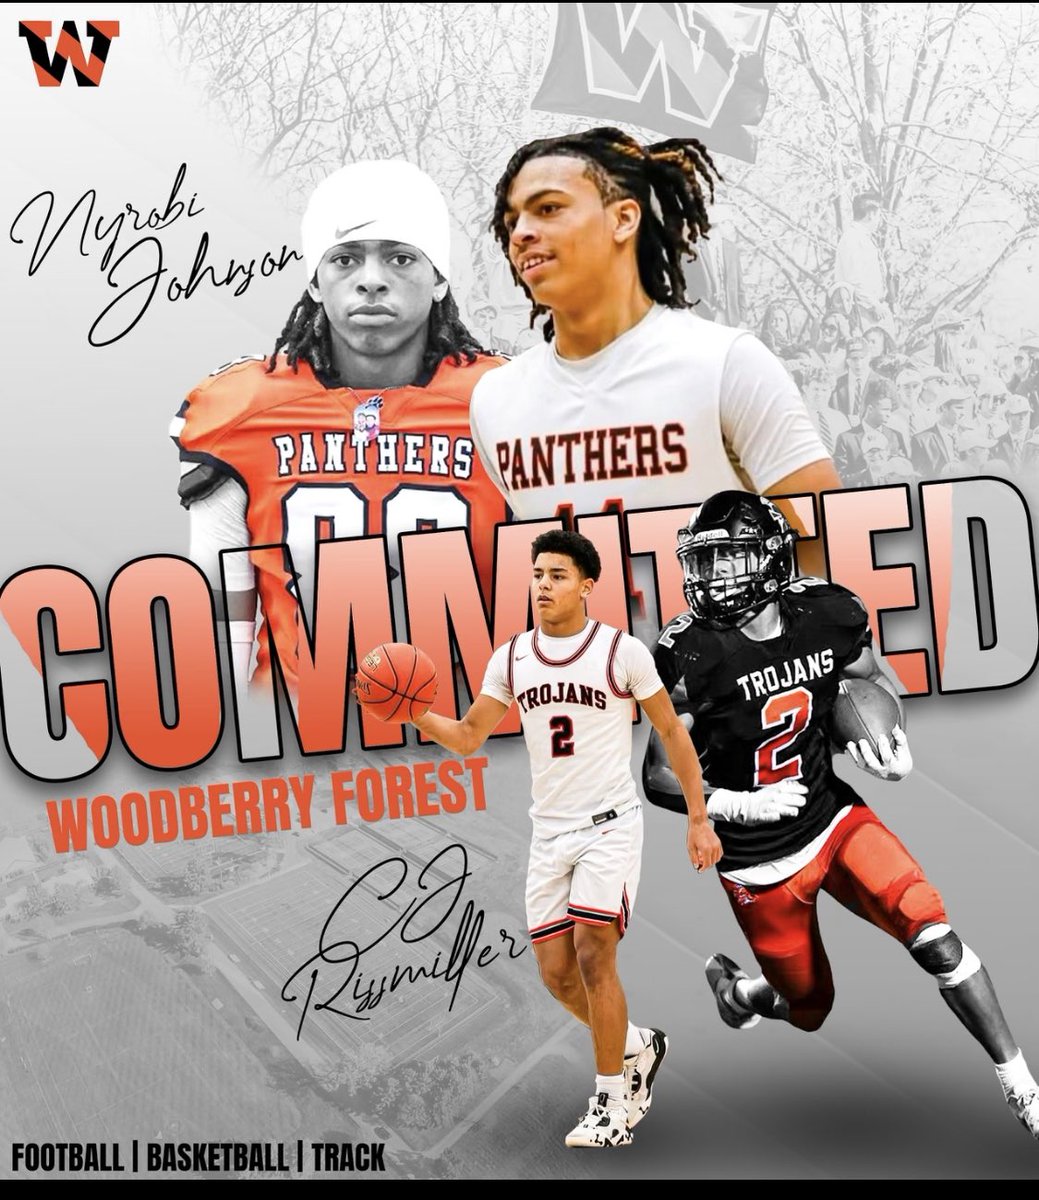 Beyond blessed to announce that I will be reclassifying to the class of 2028 and furthering my academic and athletic high school career at Woodberry Forest School🧡🖤 @CoachMatteo_WFS @Coach_Dawson @WFS_Basketball @WoodberryFB